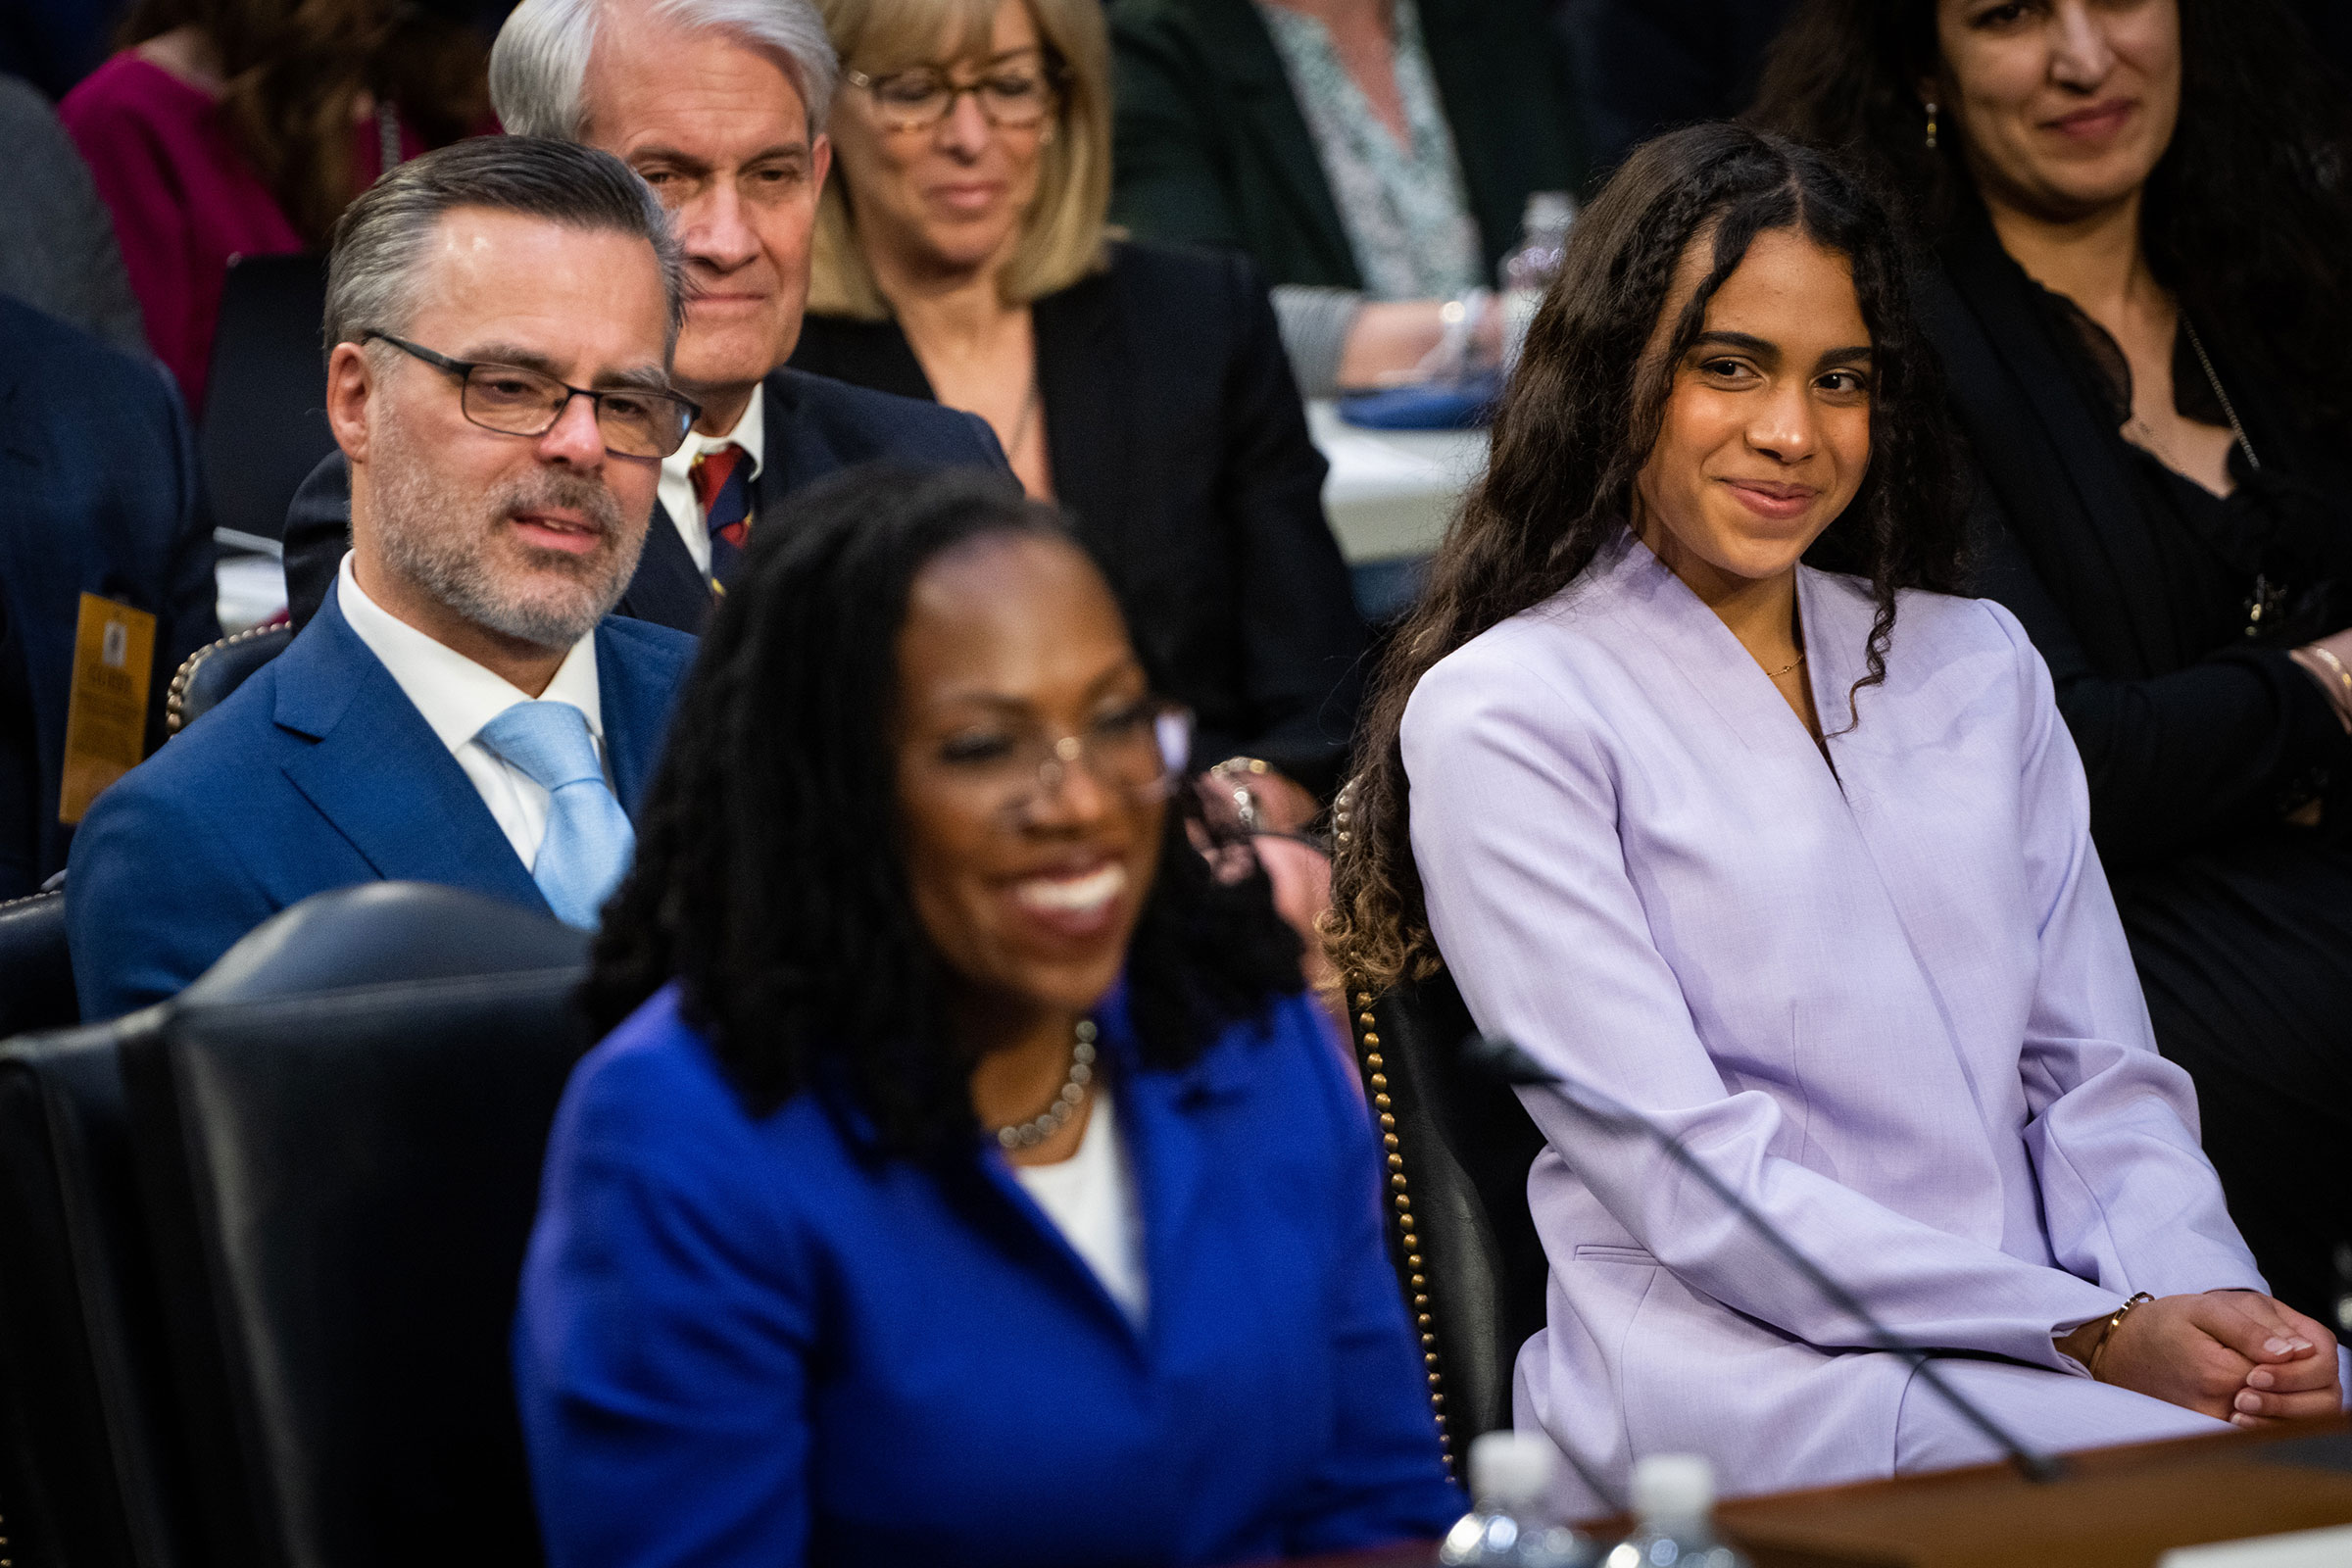 Patrick Jackson, left, husband of Supreme Court nominee Ketanji Brown Jackson, center, and daughter Leila Jackson, right, look on during confirmation hearings in Washington, on March 21. (Sarahbeth Maney—The New York Times/Redux)